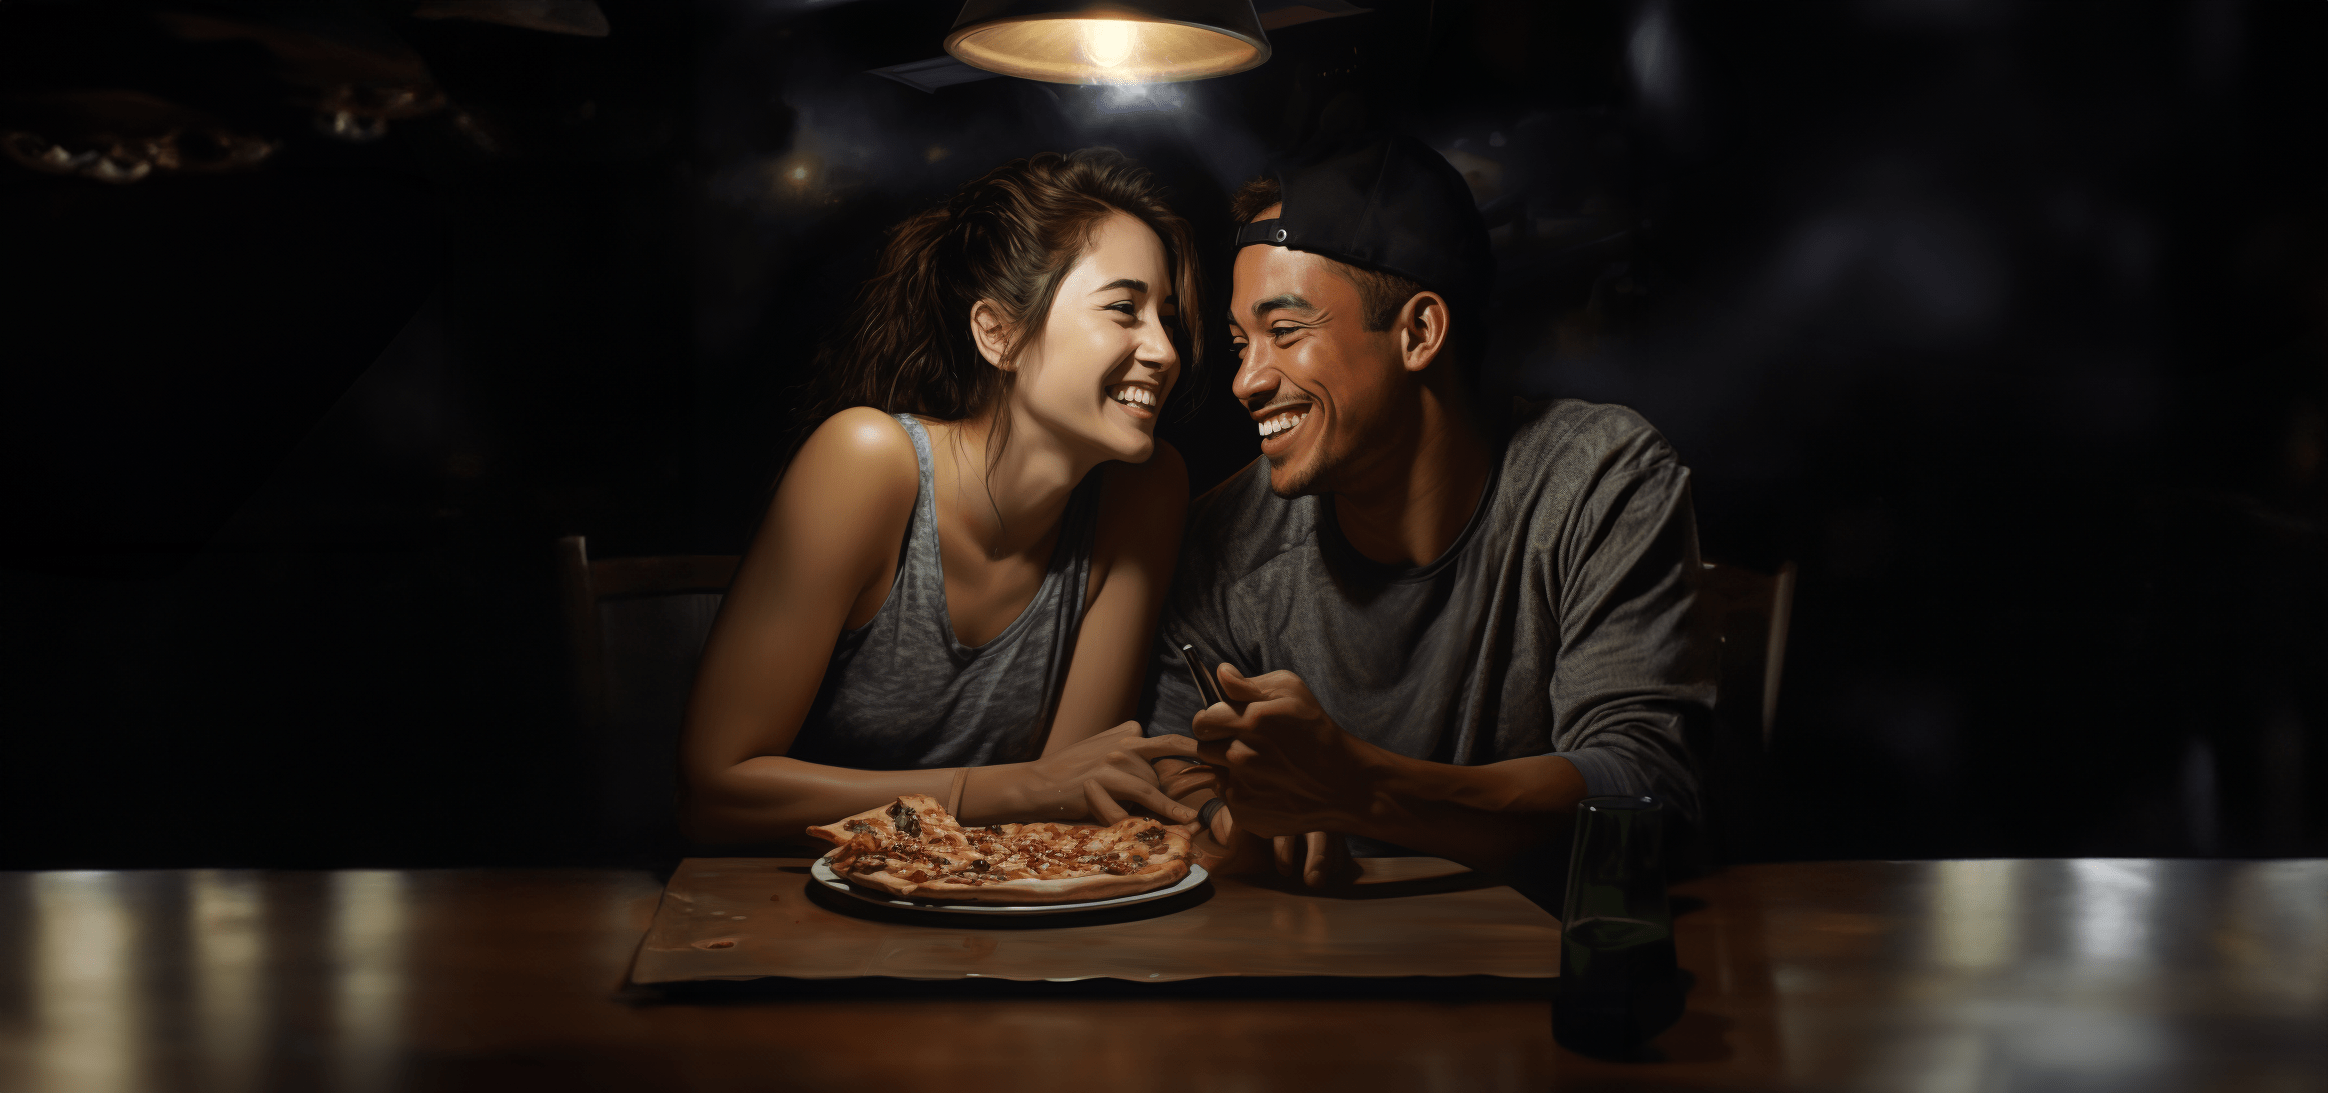 Couple on a pizza date after taking DairyPill